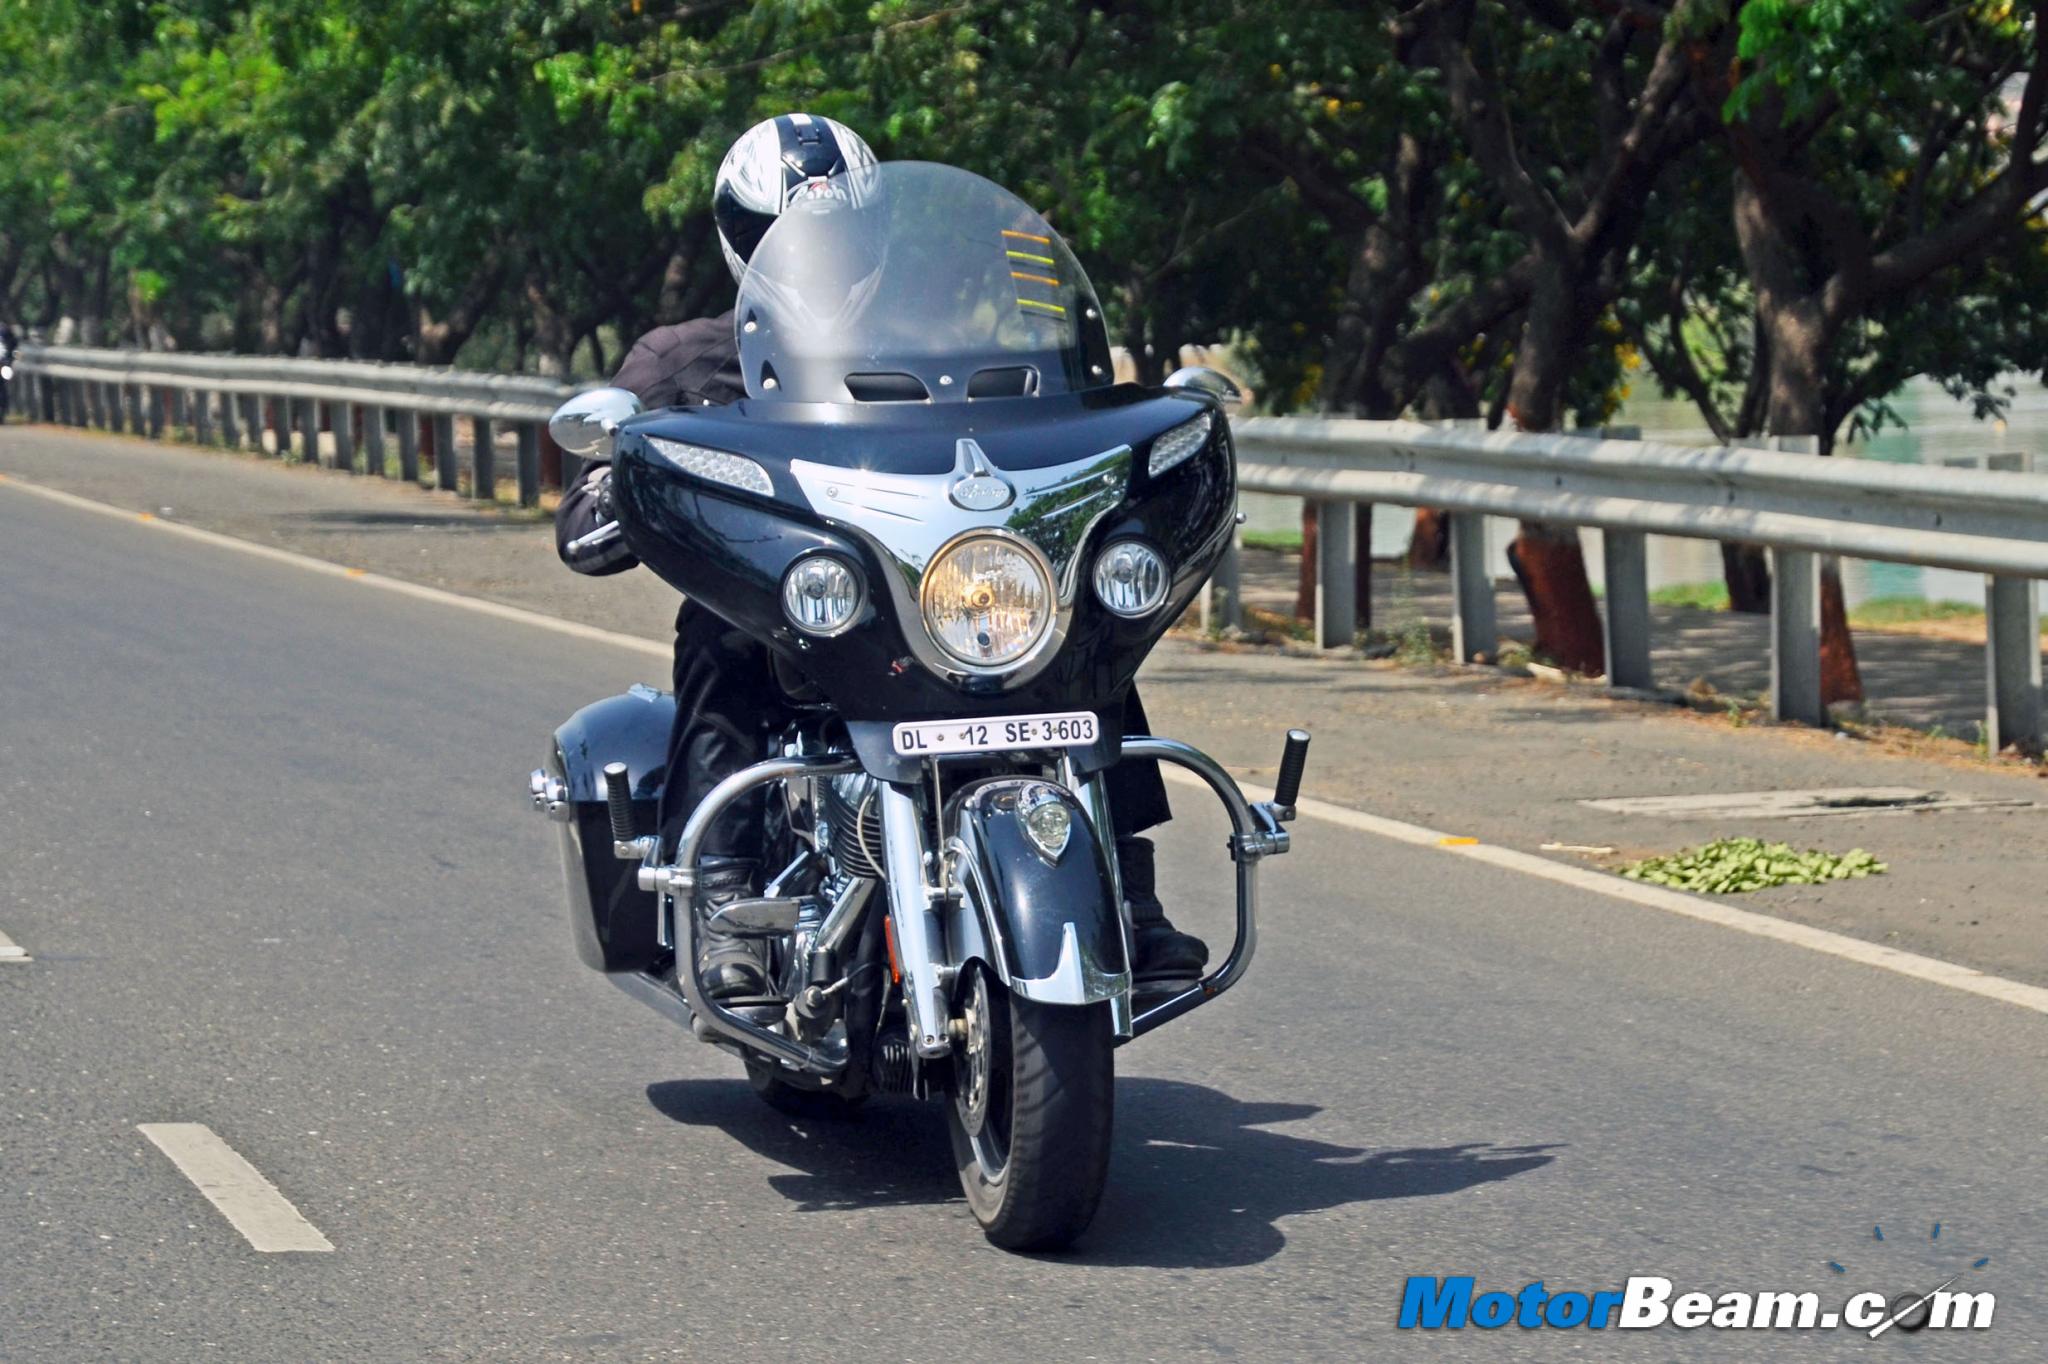 2015 Indian Chieftain Review